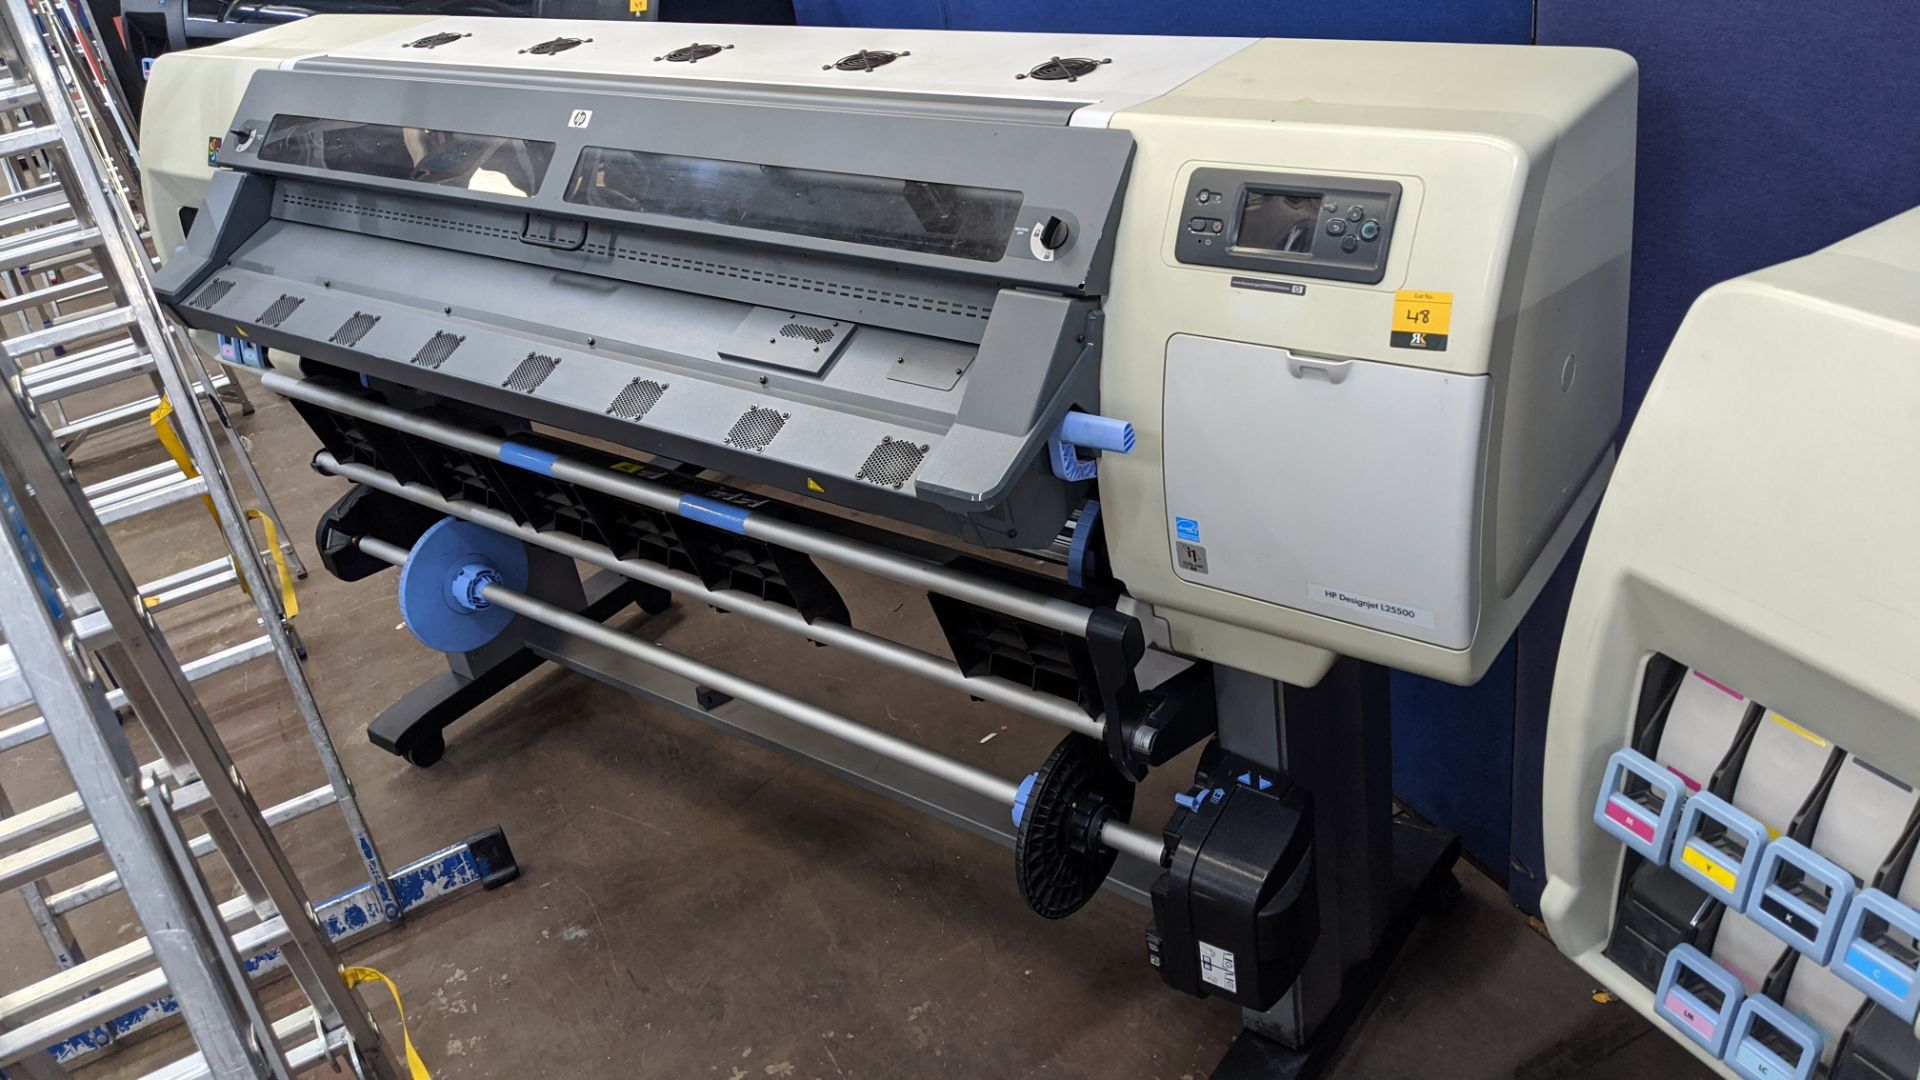 HP DesignJet L25500 wide format printer, serial no. MY1675902J, product no. CH956A/CH956-64001 - Image 2 of 7